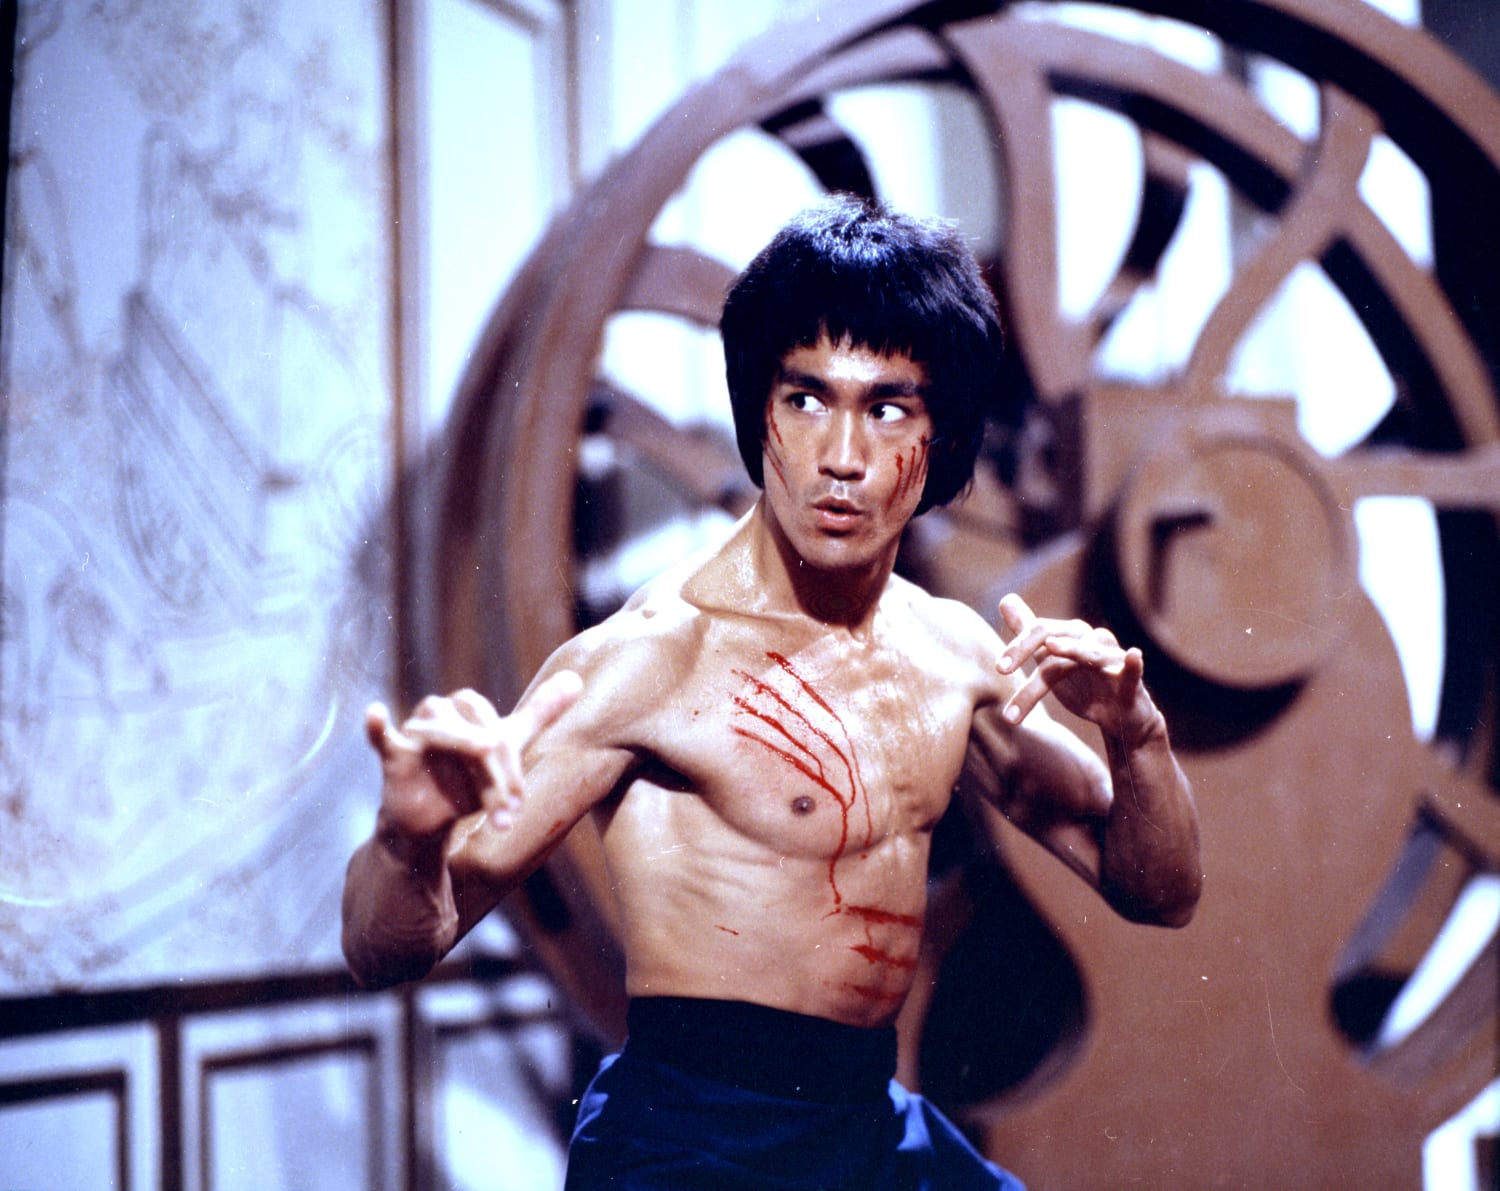 Over Four Decades After Bruce Lee's Death, His Family Carries On His Legacy